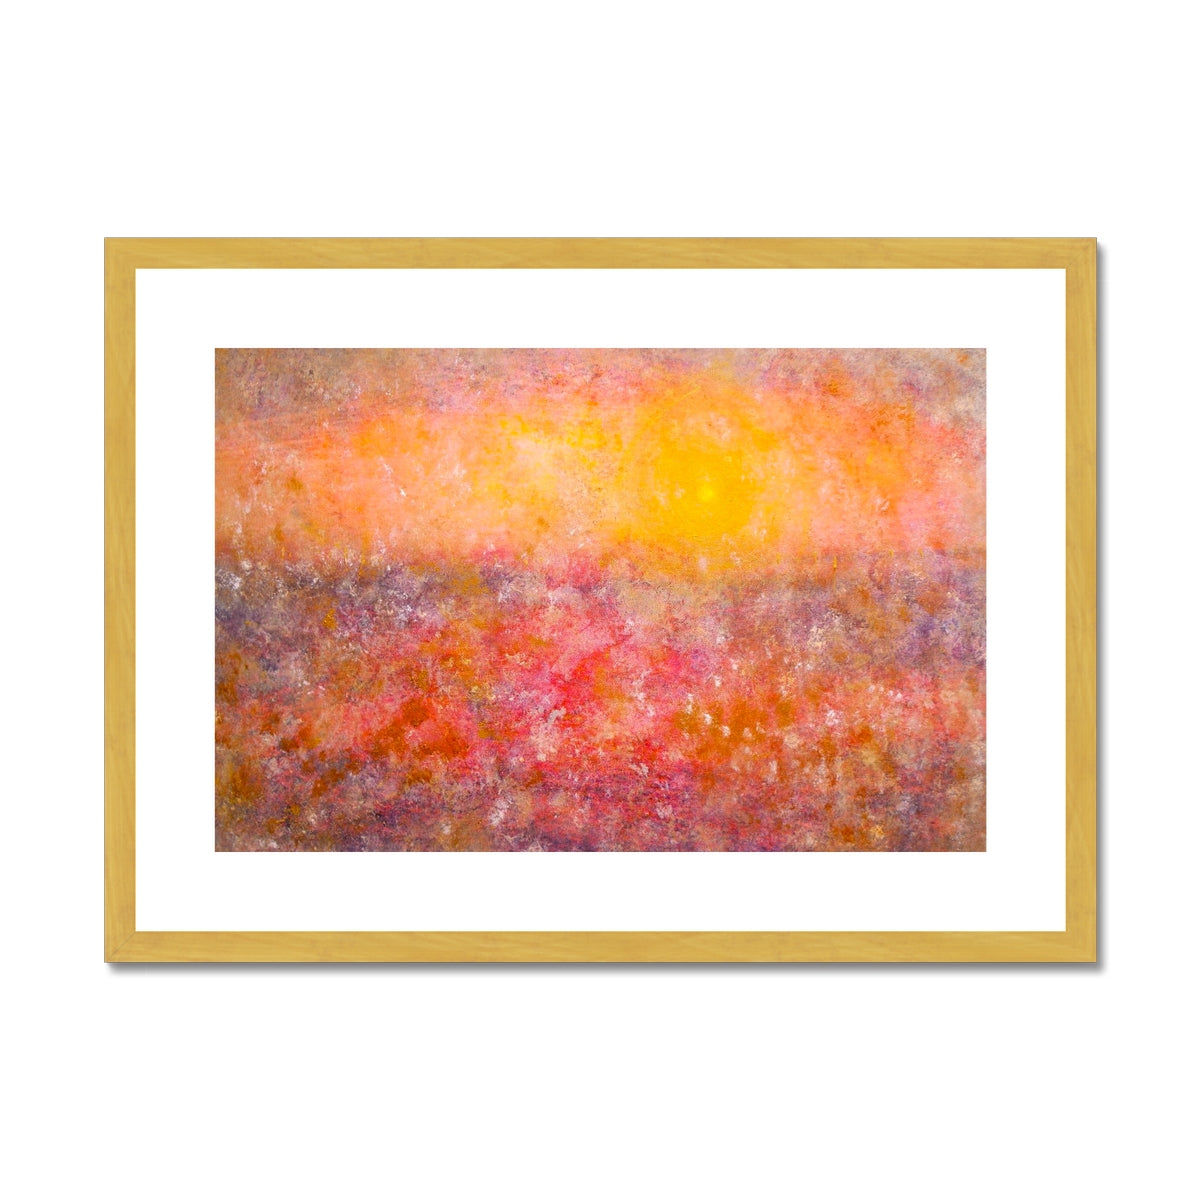 Sunrise Mist Horizon Abstract Painting | Antique Framed & Mounted Prints From Scotland-Antique Framed & Mounted Prints-Abstract & Impressionistic Art Gallery-A2 Landscape-Gold Frame-Paintings, Prints, Homeware, Art Gifts From Scotland By Scottish Artist Kevin Hunter